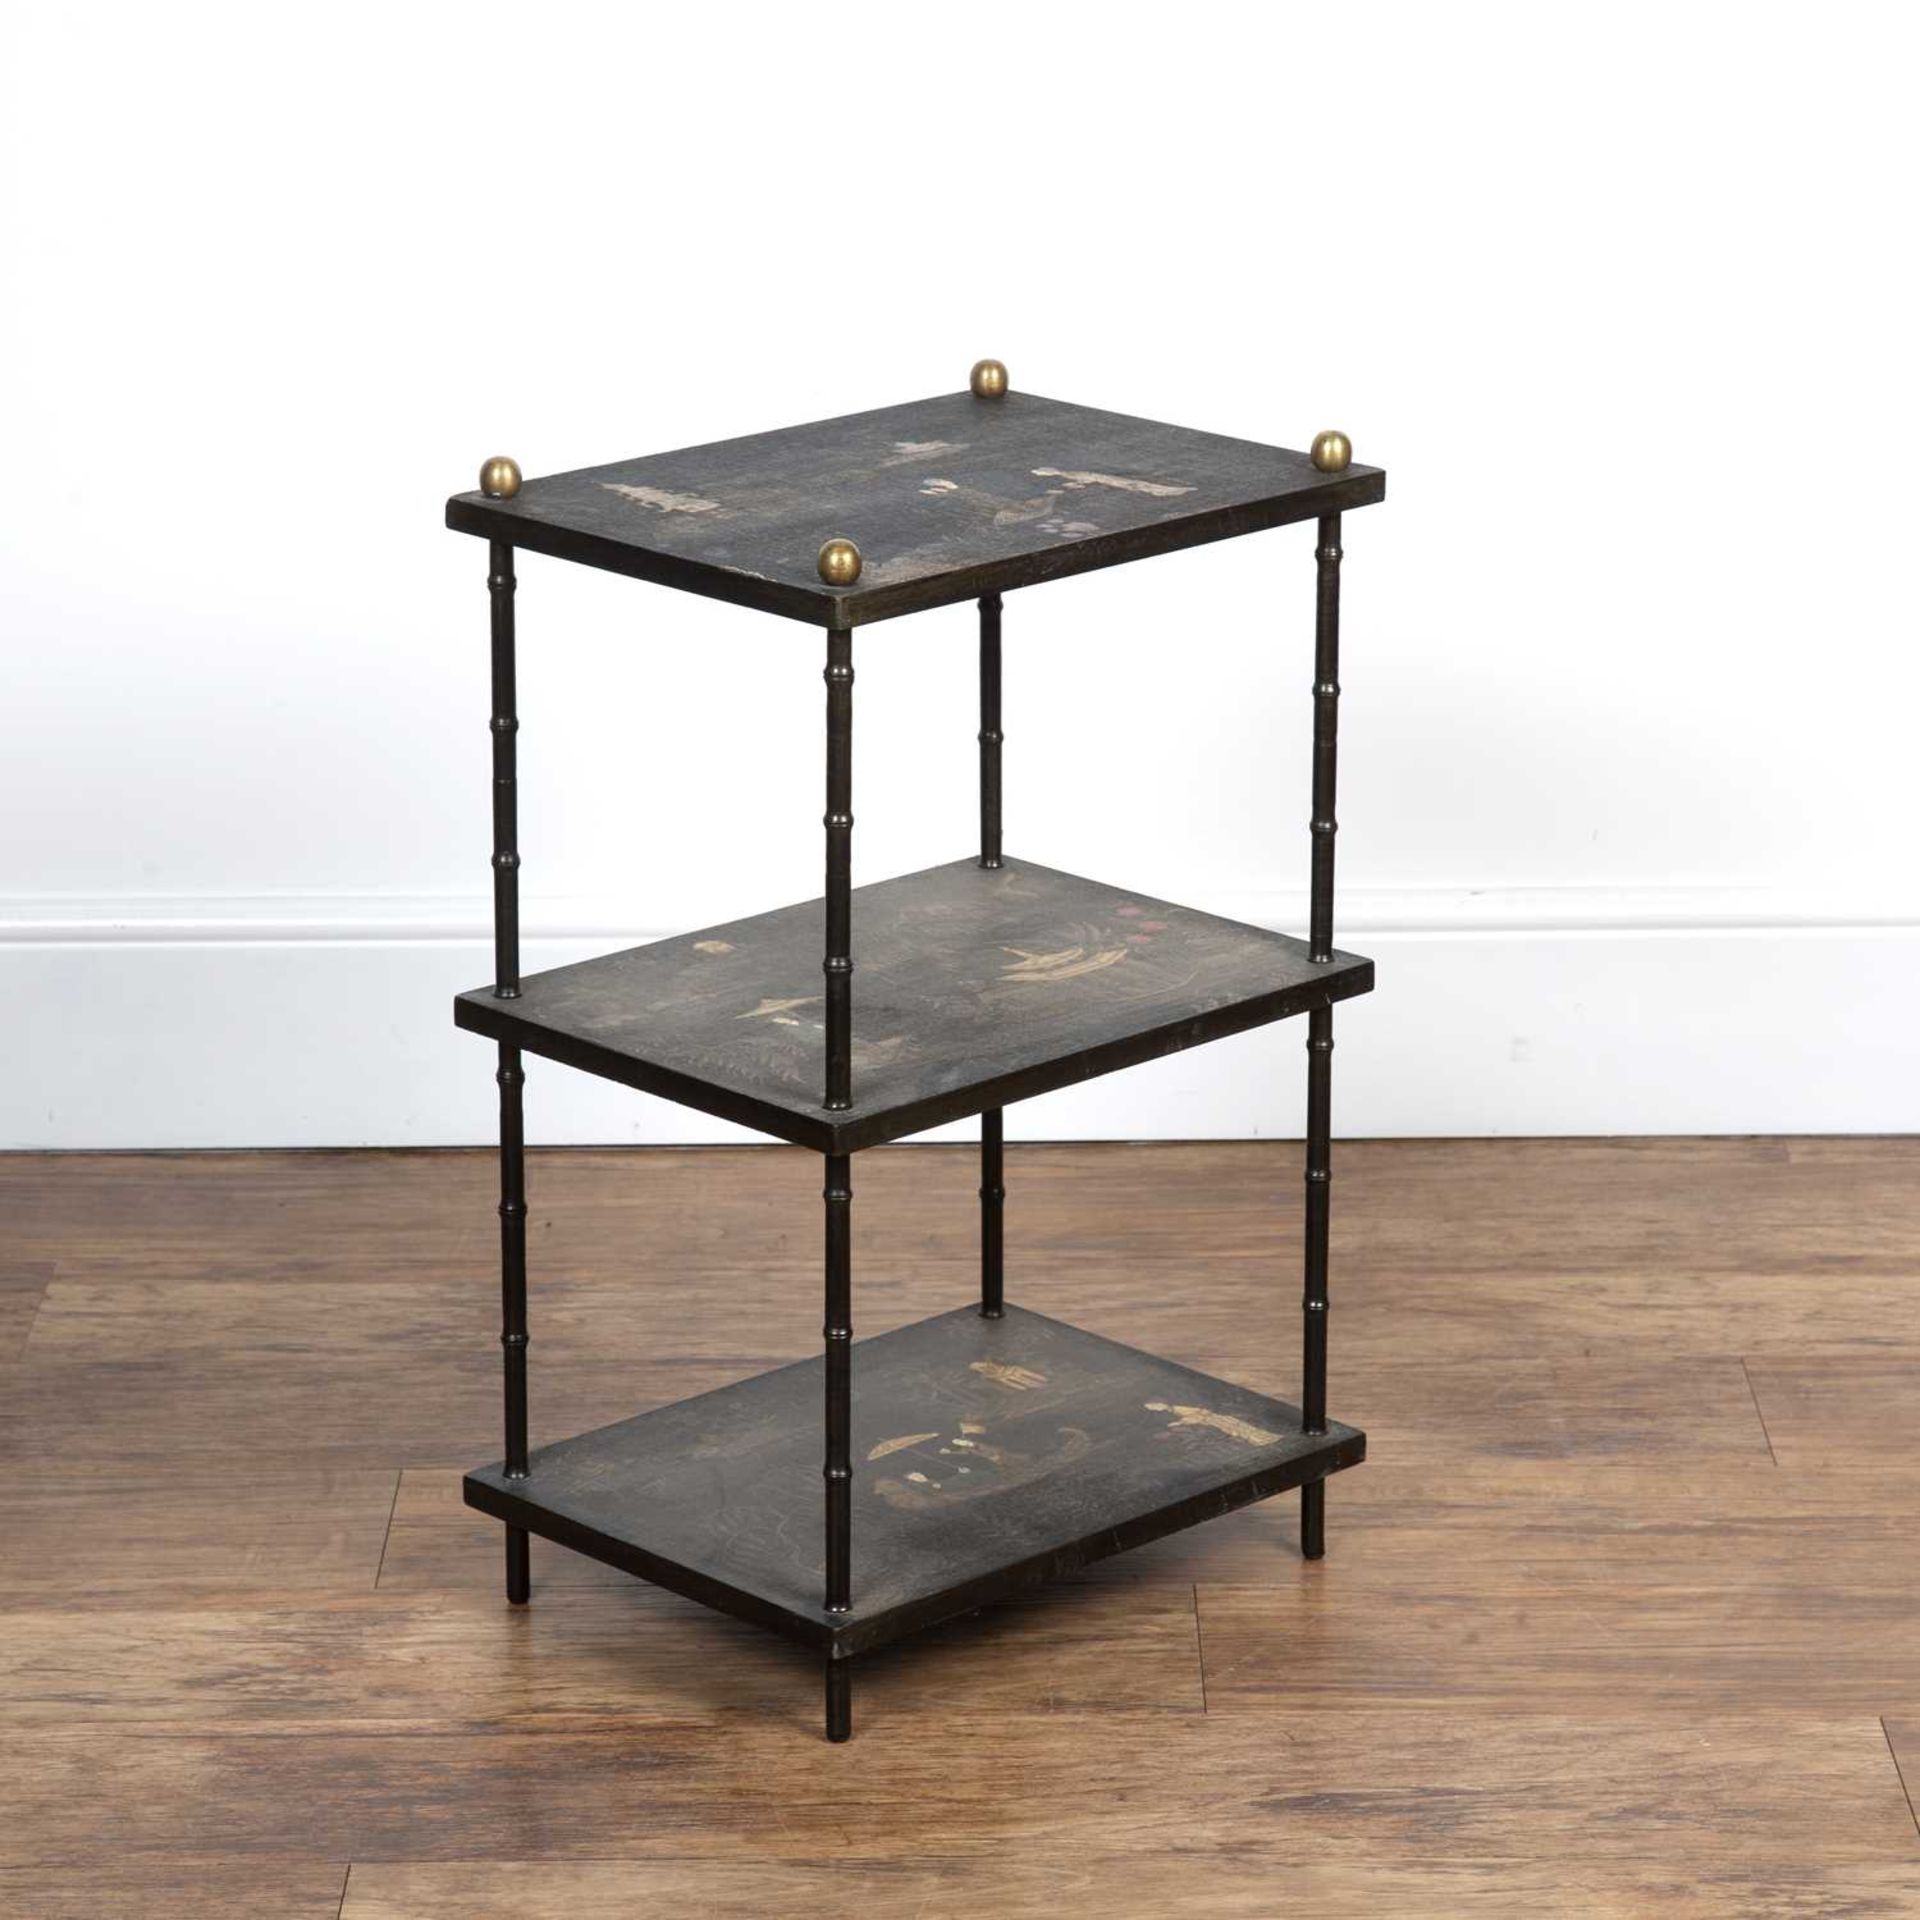 Chinoiserie three tier stand with painted decoration on faux bamboo metal supports, 40.5cm wide x